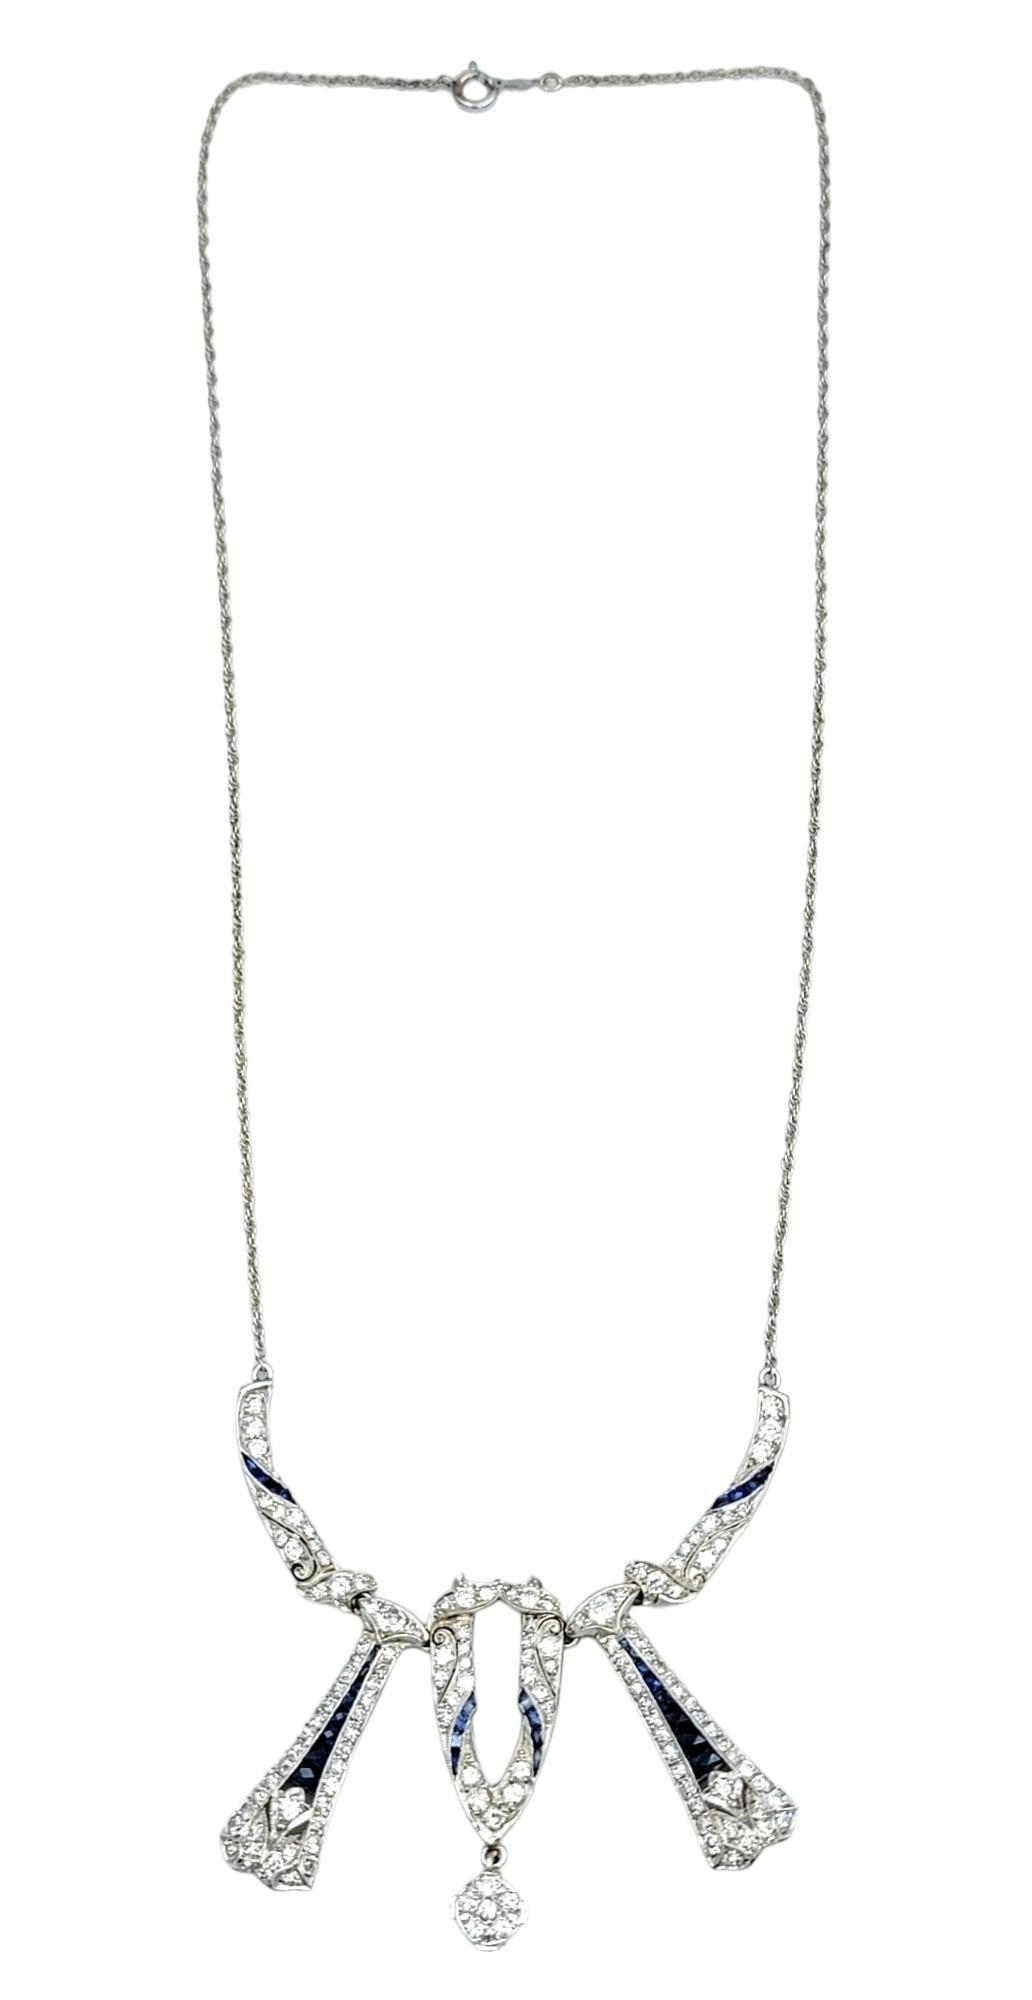 Diamond and Blue Sapphire Art Deco Necklace with Milgrain in 14 Karat White Gold In Good Condition For Sale In Scottsdale, AZ